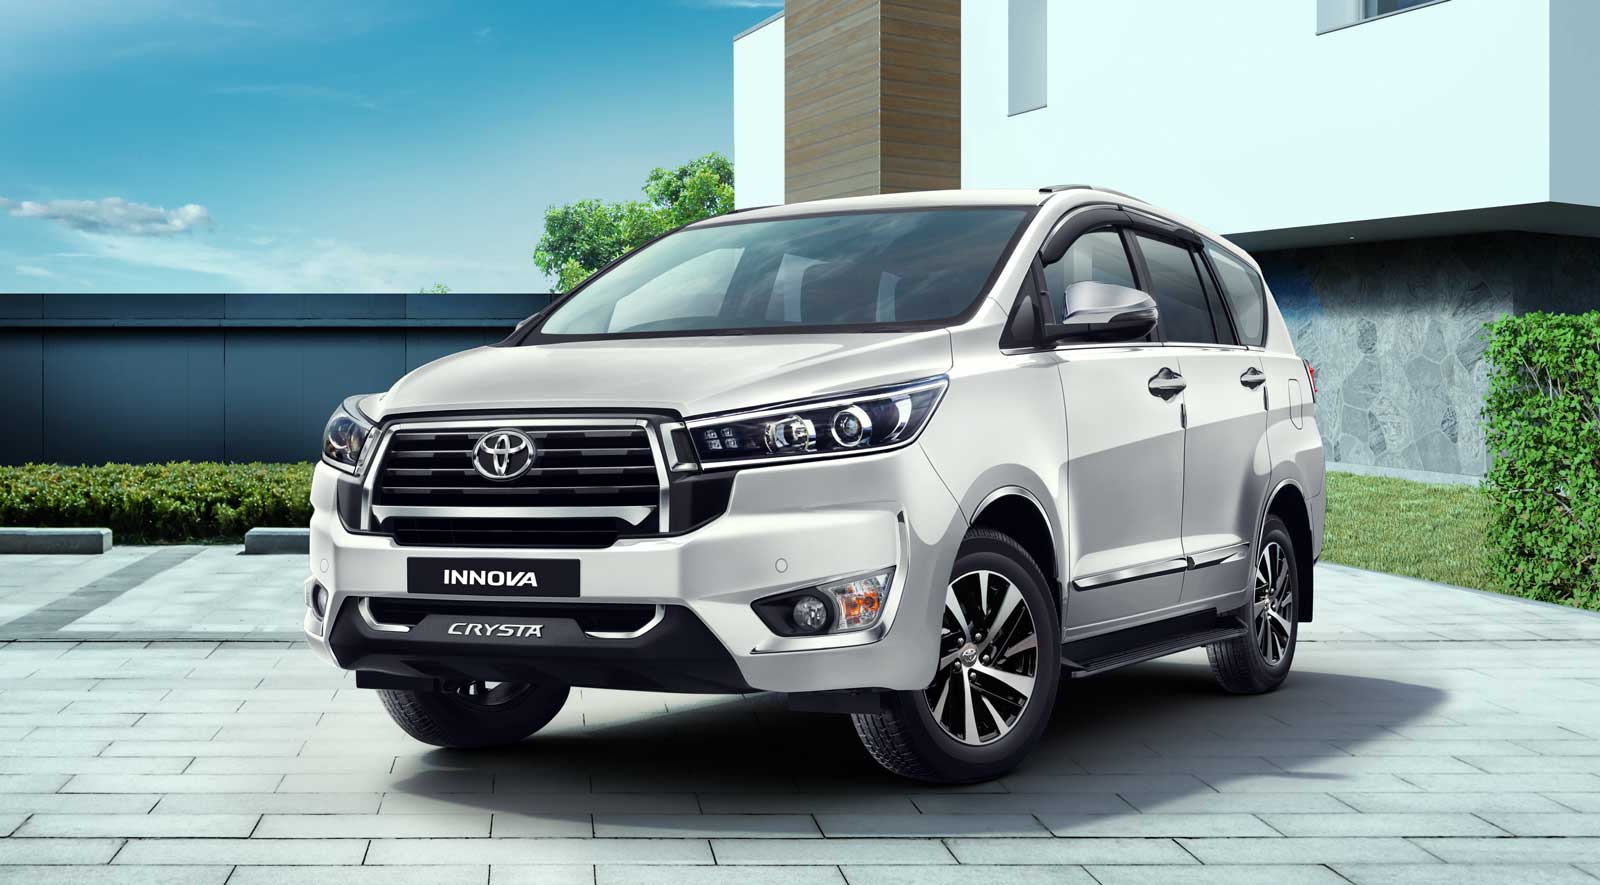 GS Design launched with customised Toyota Innova Crysta and Force Traveller